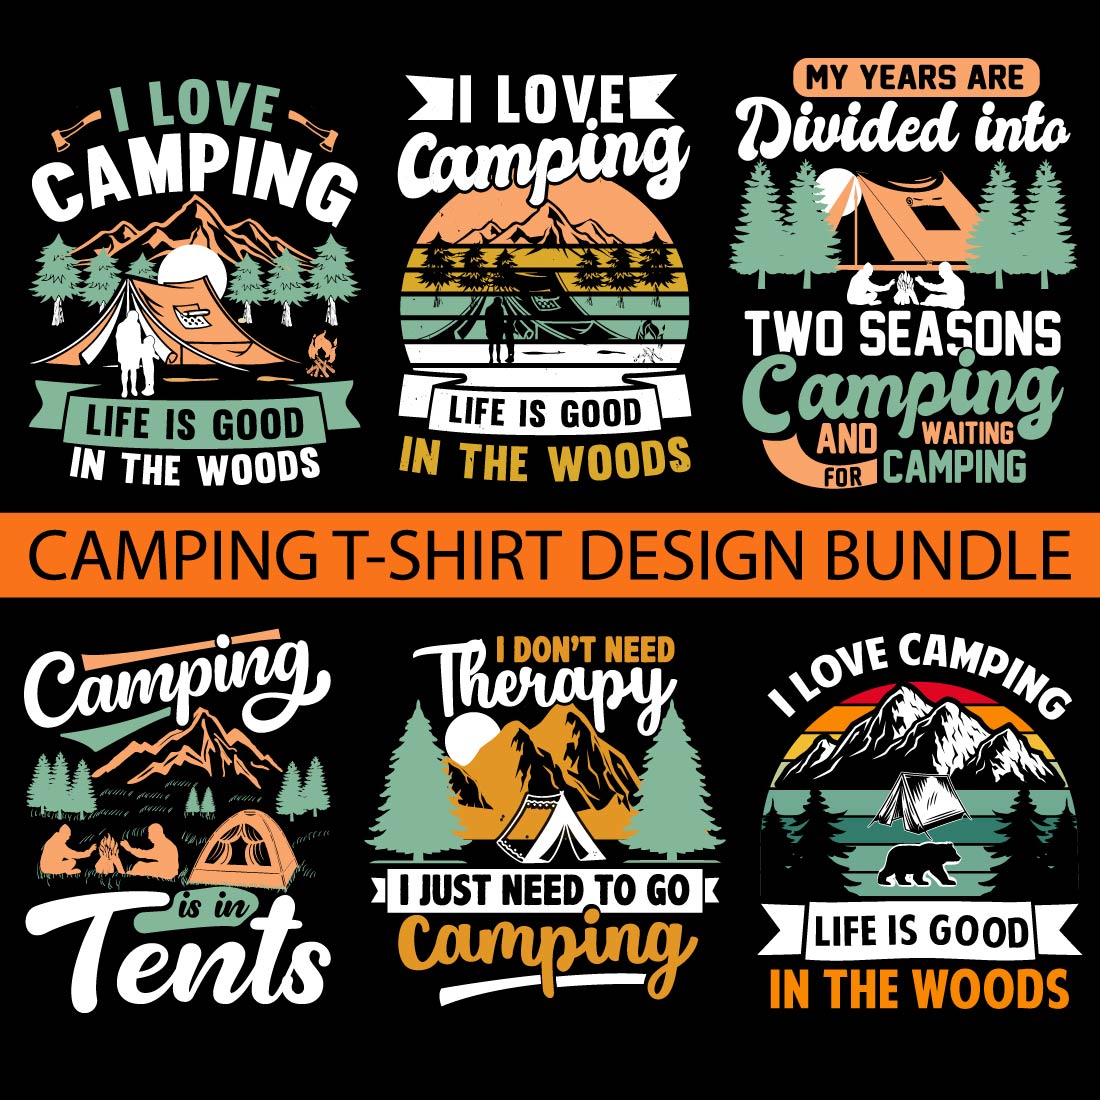 Camping t-shirt design vector cover image.